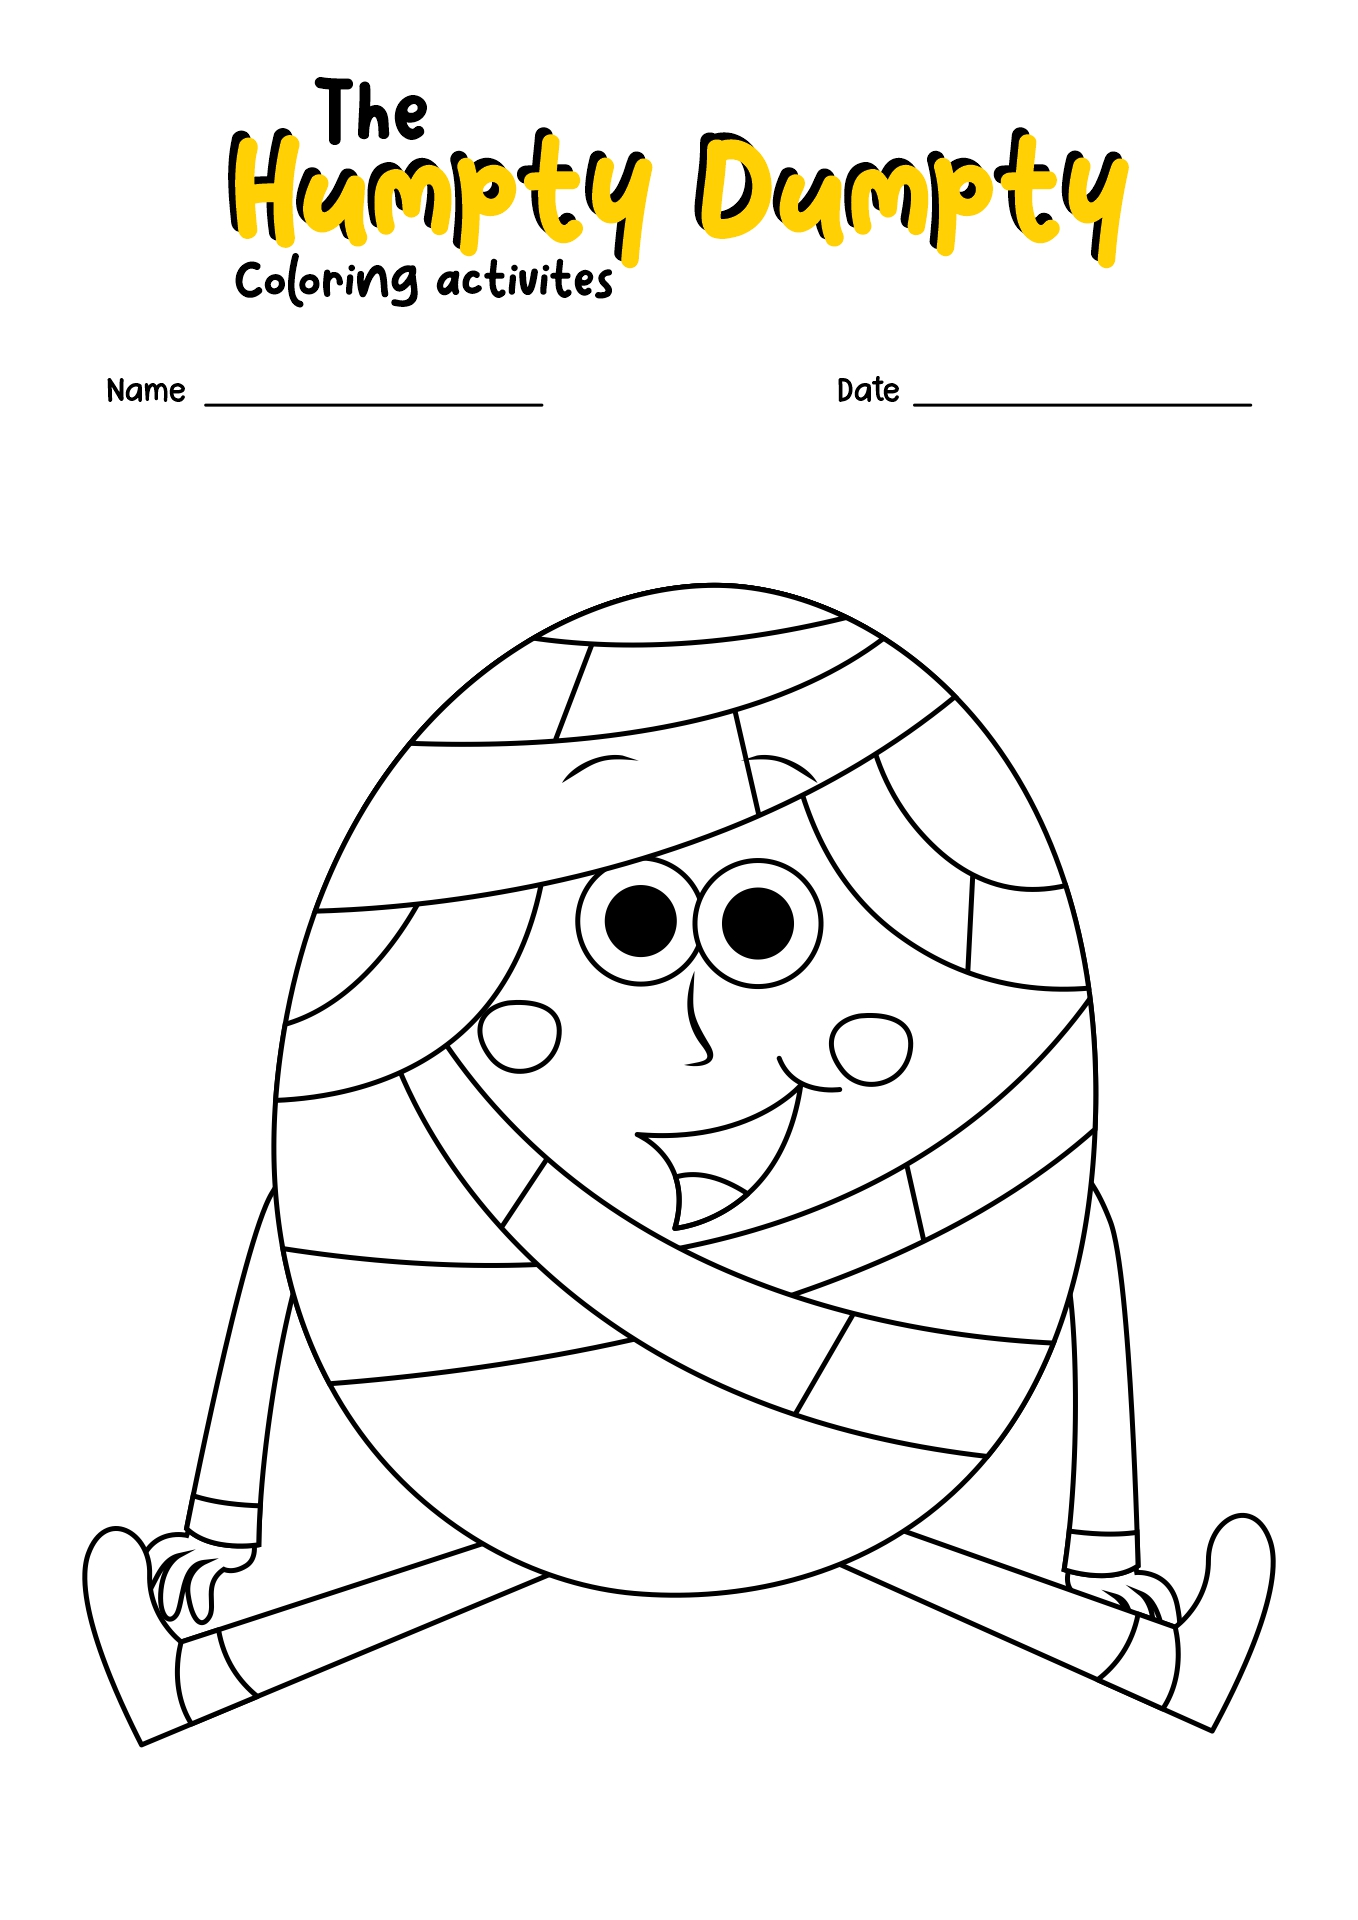 Humpty Dumpty Coloring Page Image